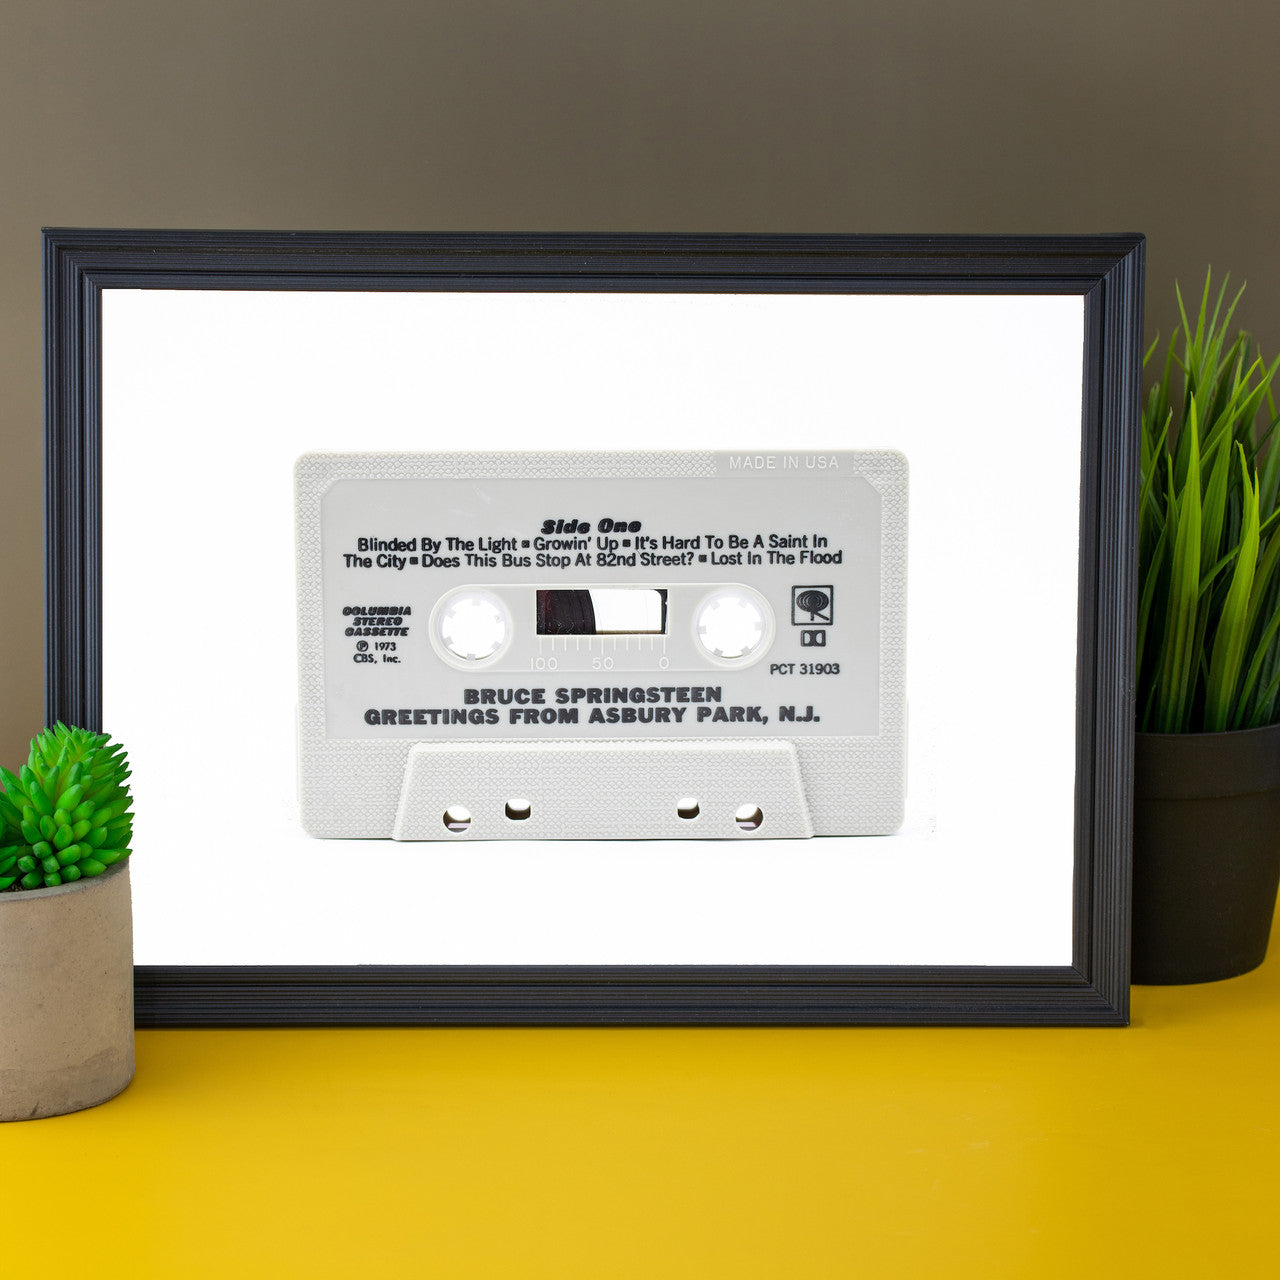 Modern art photo of the cassette of "Bruce Springsteen Greetings from Asbury Park, N.J." displayed in your office